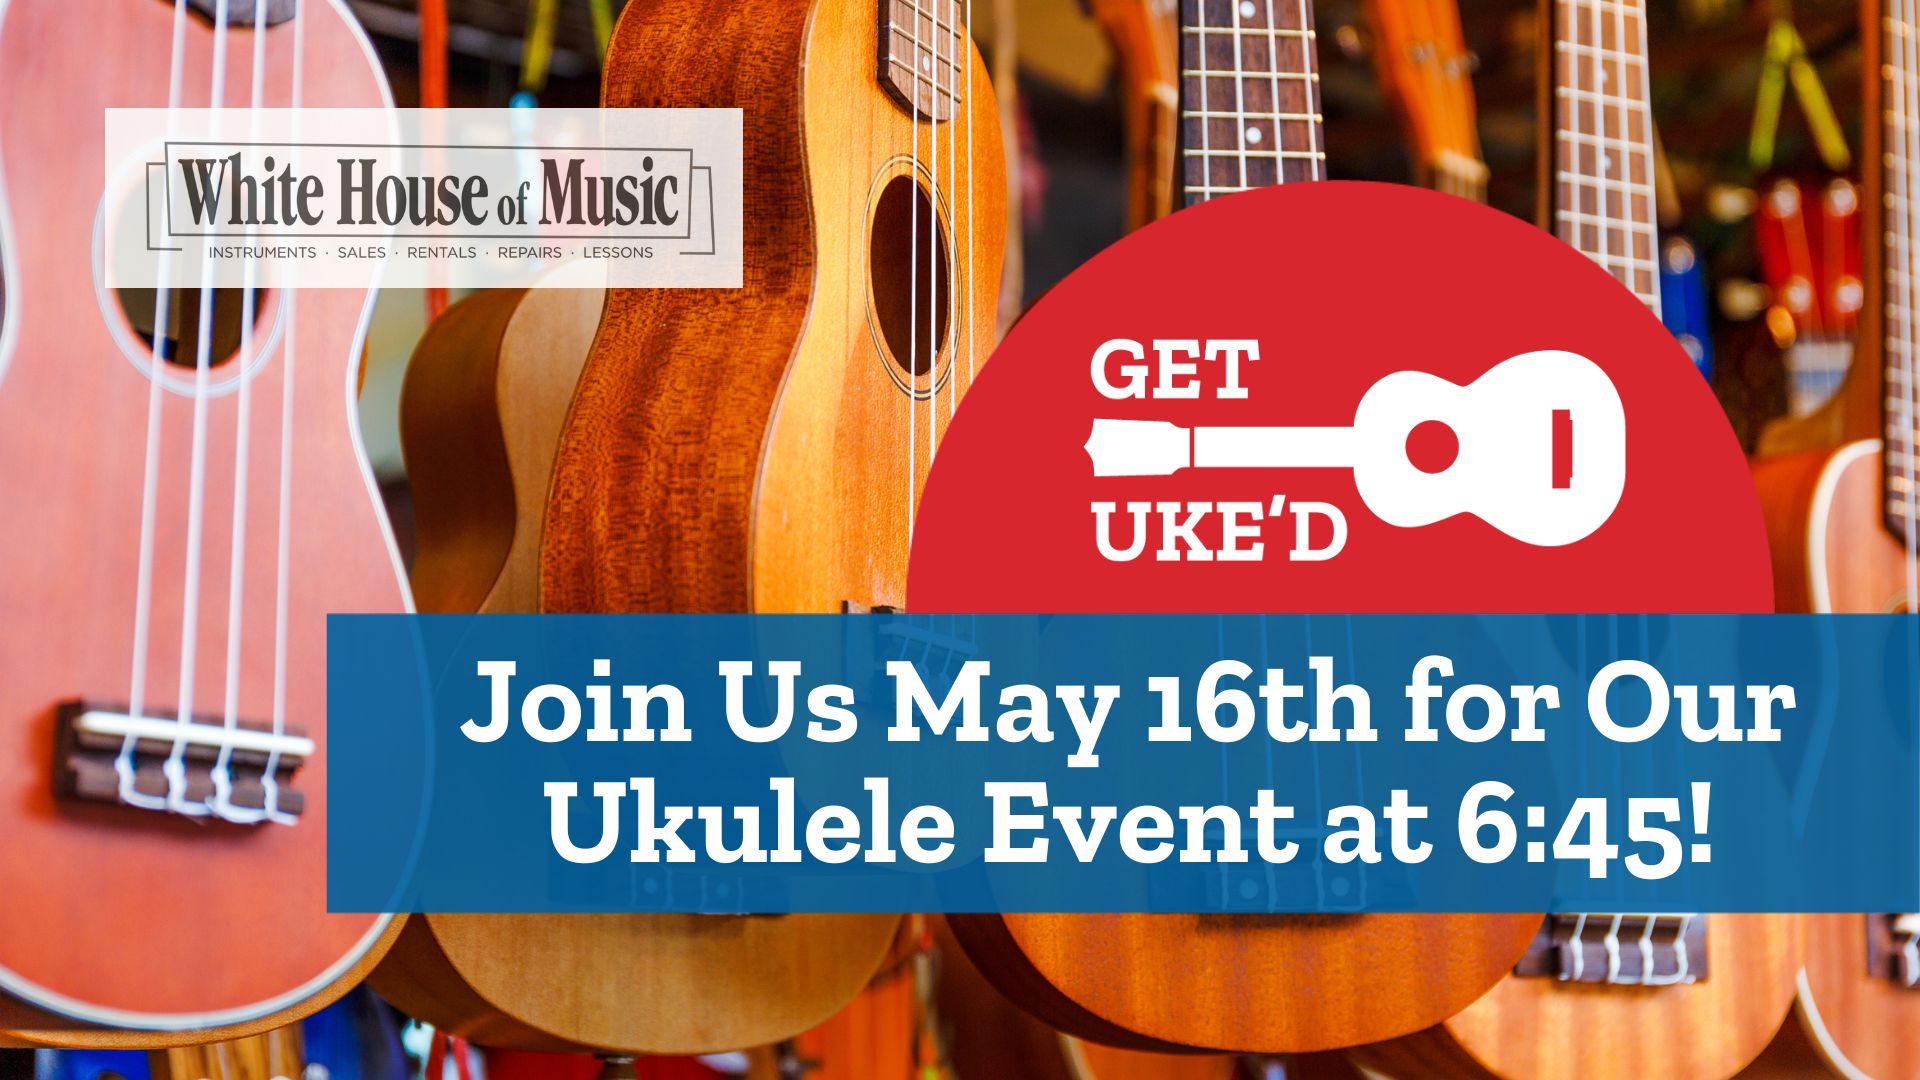 Join us for Get Uke'd May 16th